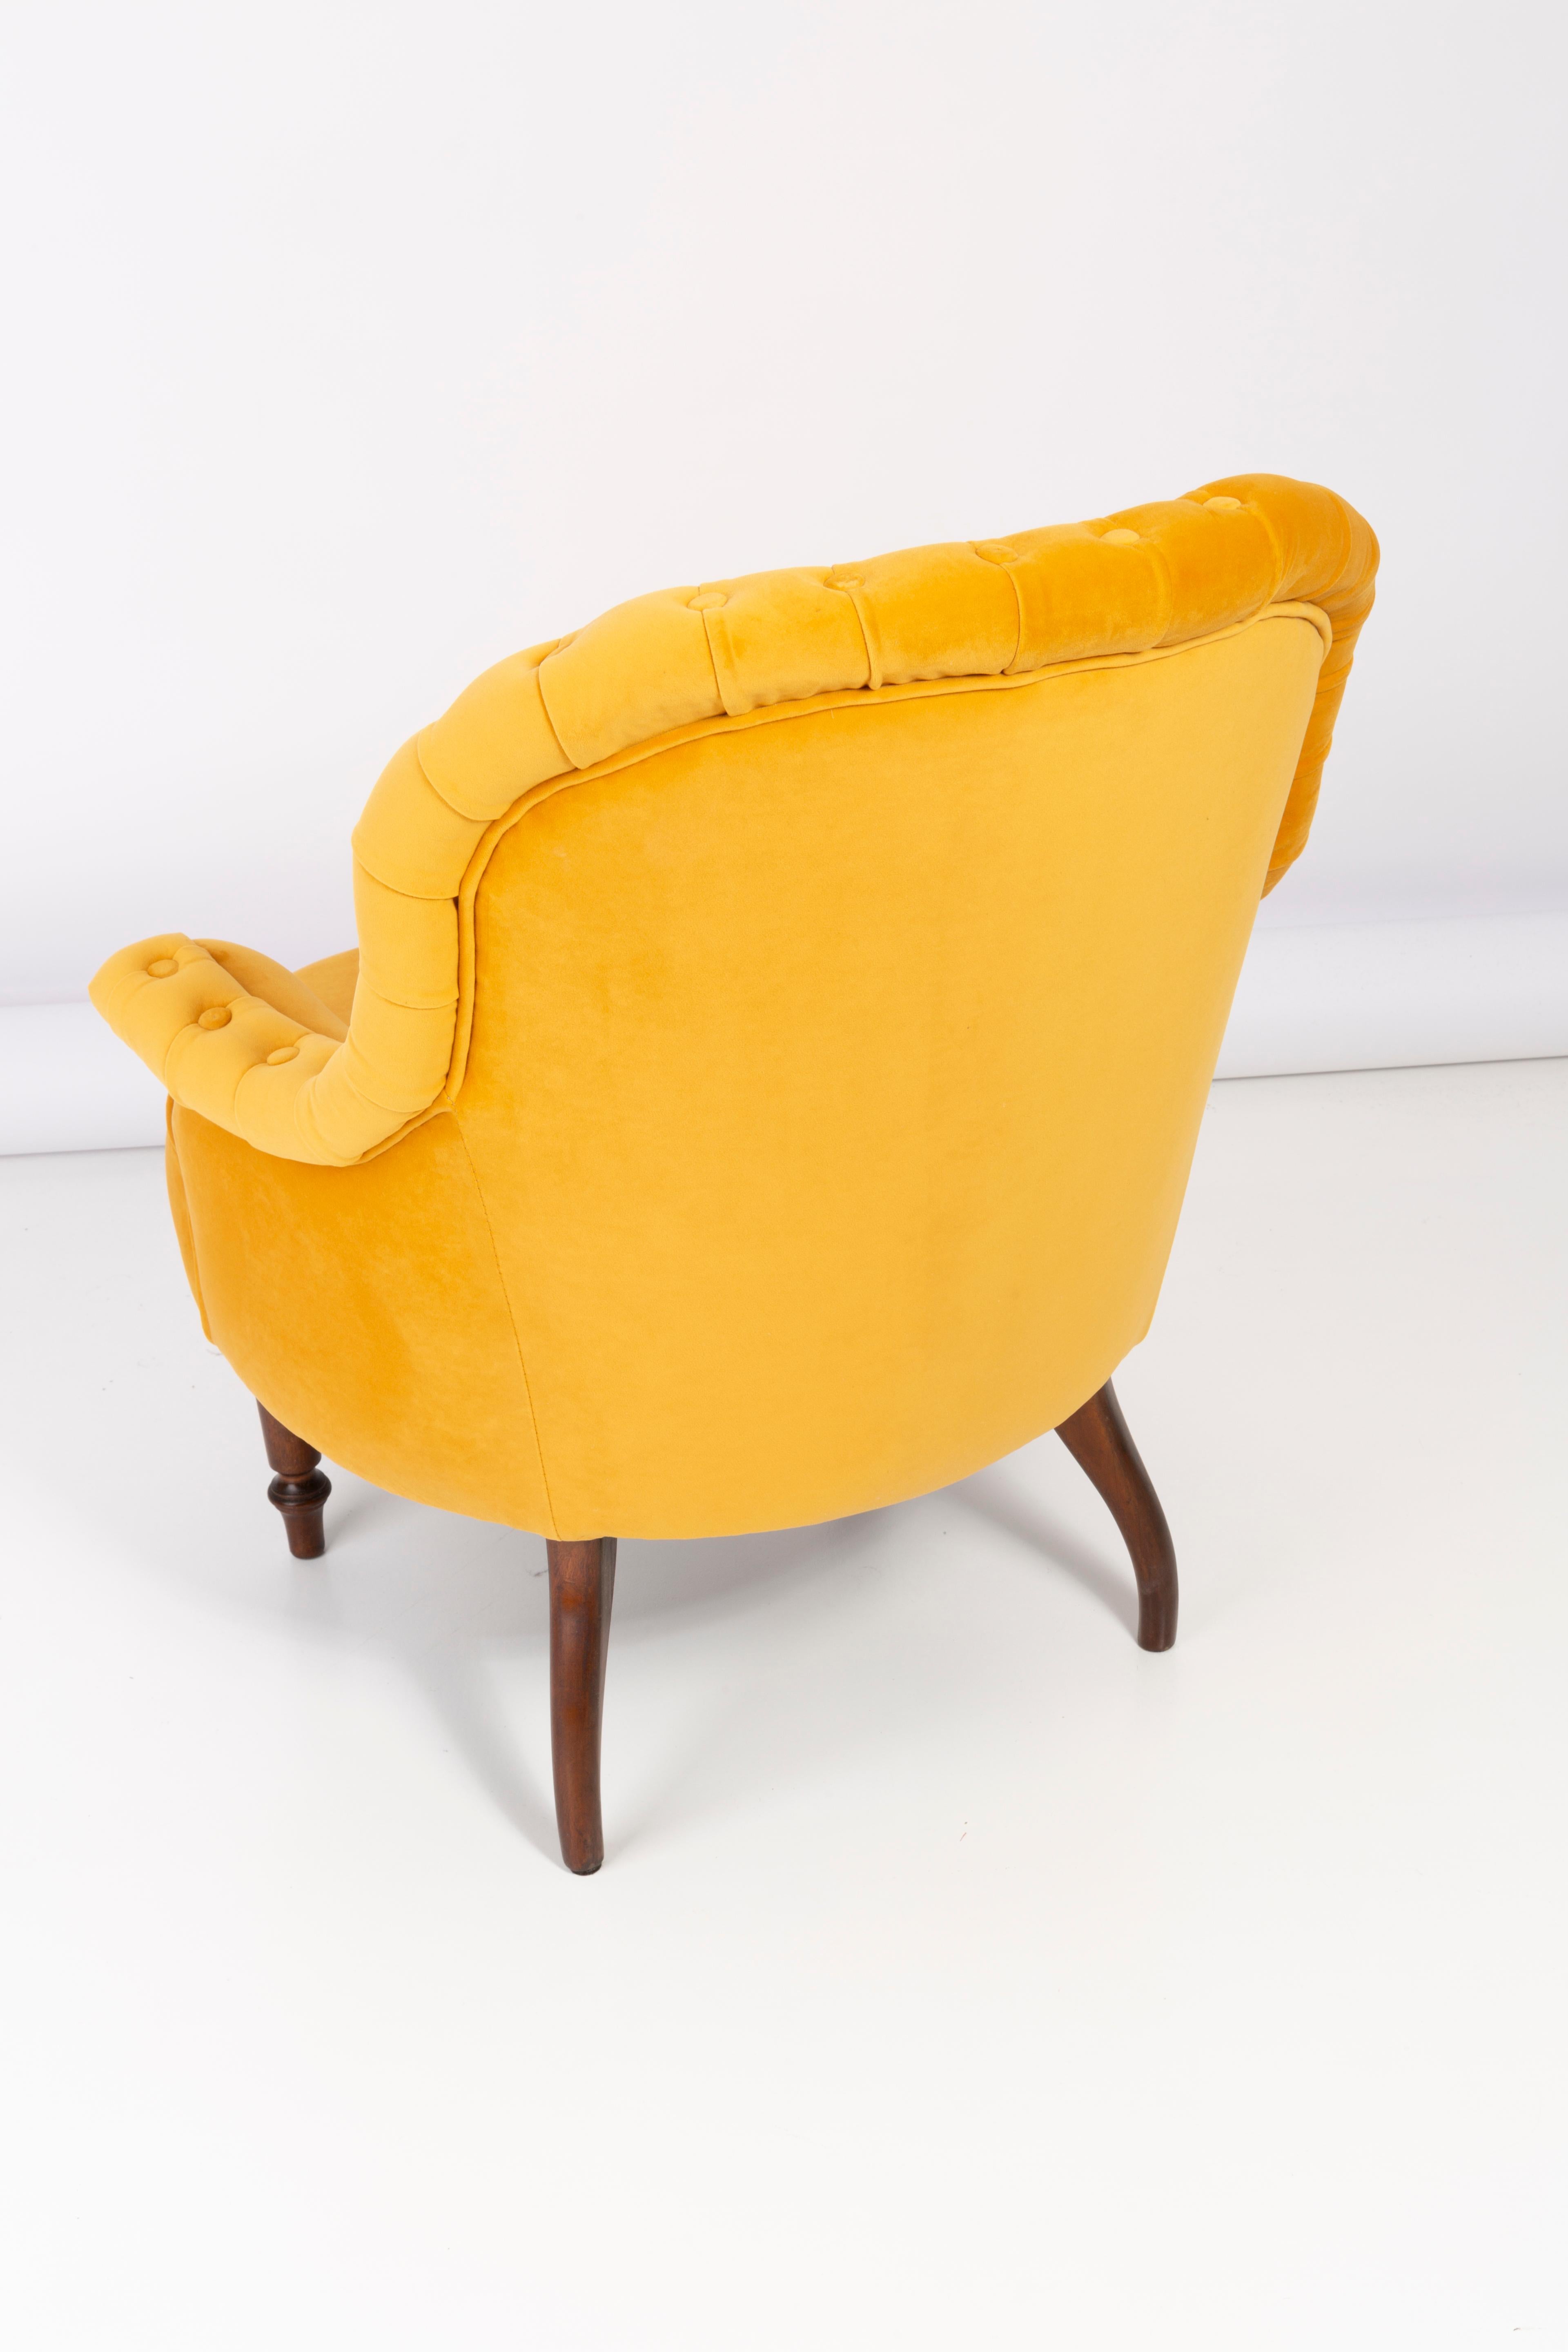 Unique Yellow Mustard Armchair, 1930s, Germany For Sale 2